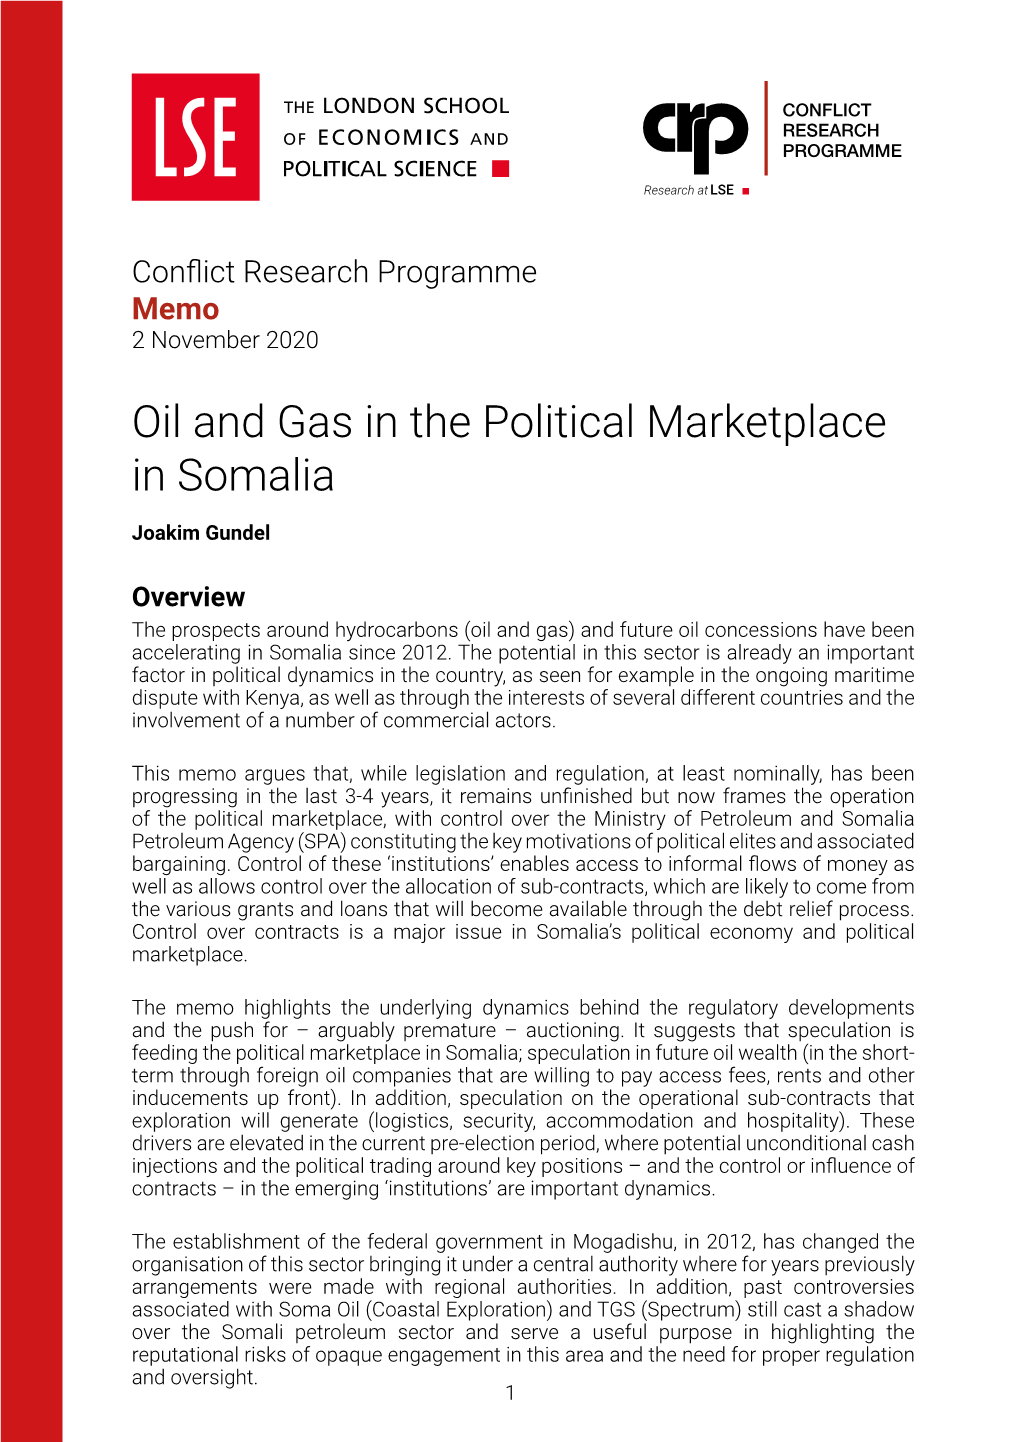 Oil and Gas in the Political Marketplace in Somalia